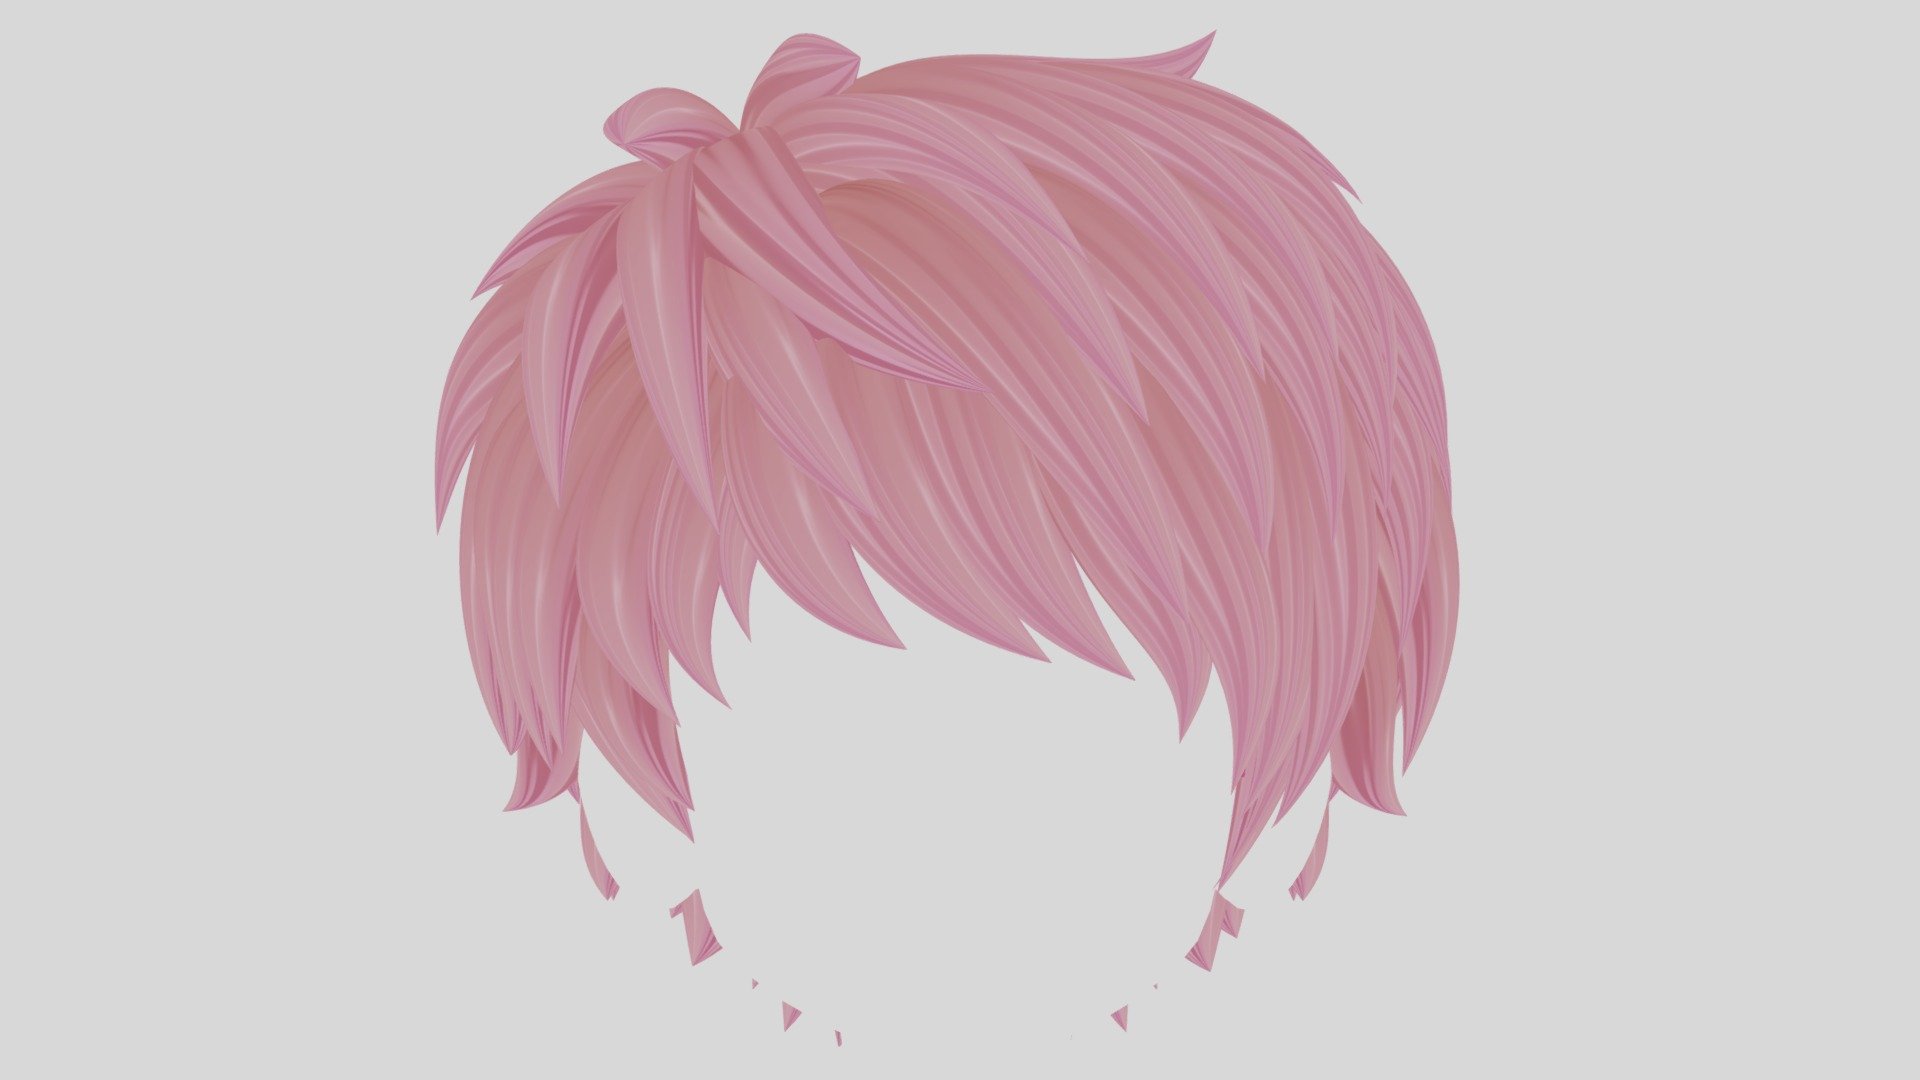 Editable bezier curves based hair ready to be converted into mesh. Includes the bevel object to modelate the bevel hair shape and thickness of the hair if required. Material features five different color textures (Blonde, Black, Brown, Pink and Red Hair) or you can remove the texture to easily cutomize it to any color.

The Hairbase included is ready to match with the Anime Boy Head Type E shape (skfb.ly/oqEVI), but the Hair Curves are easily adaptable to any head shape!.

💮 If you liked my work remember to Follow me and Share! 🧸 💬 Commissions Open: ko-fi.com/Tsubasa_Art ☕🌸 !! - Anime Hair (Short Pixie Style) - Buy Royalty Free 3D model by Tsubasa ツバサ (@Tsubasa_Art) 3d model